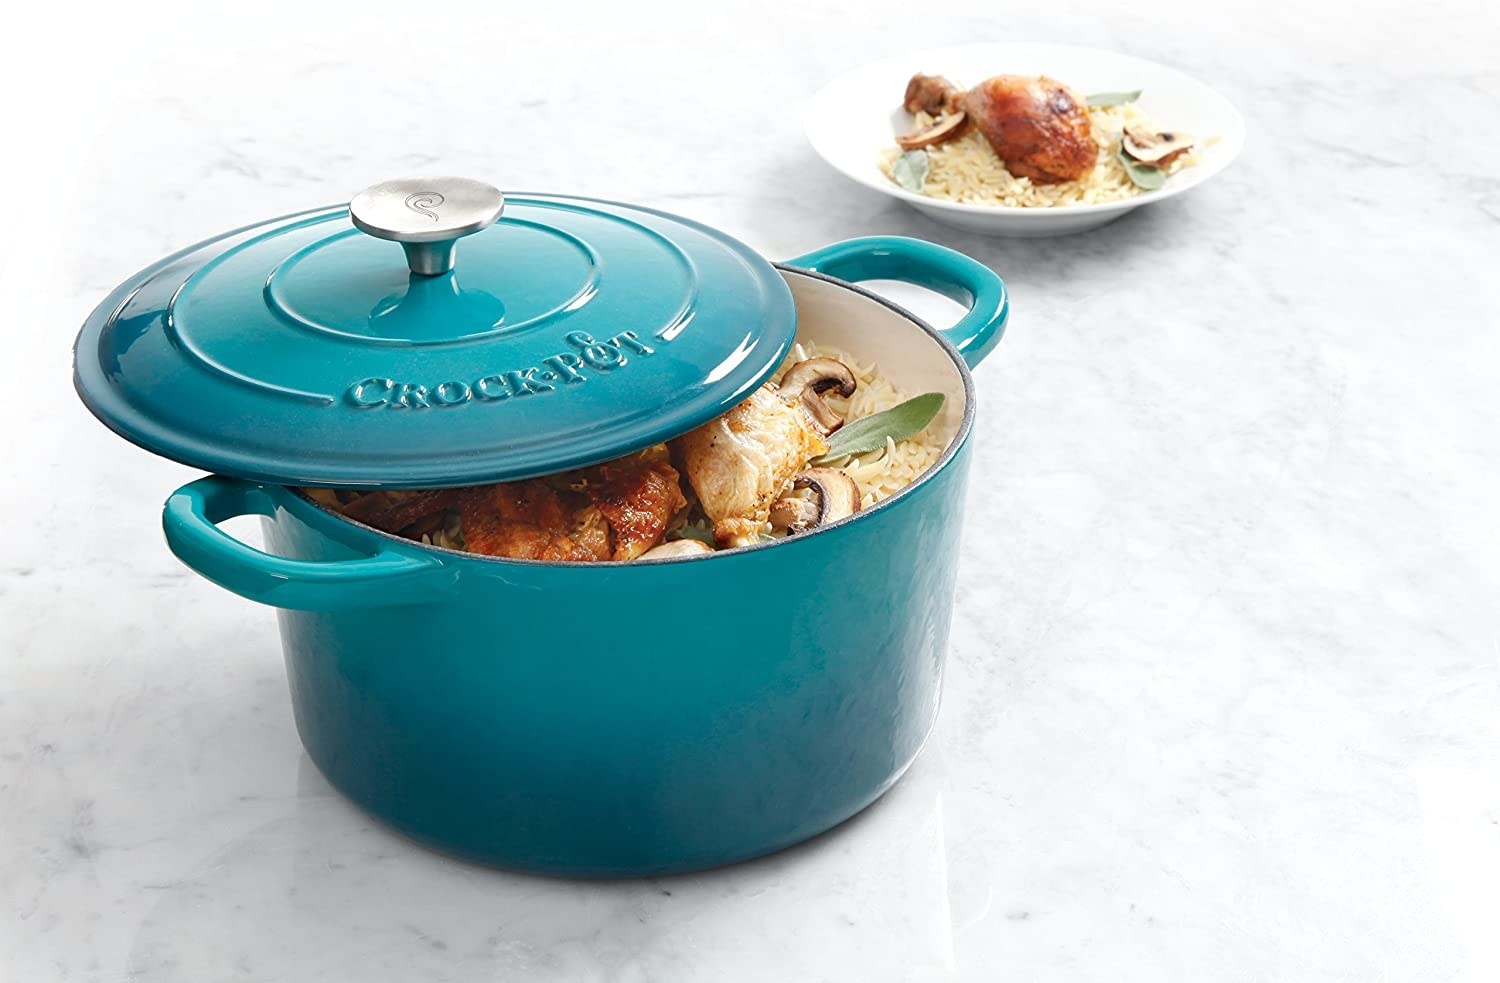 The teal dutch oven with handles and a chicken and rice dish inside